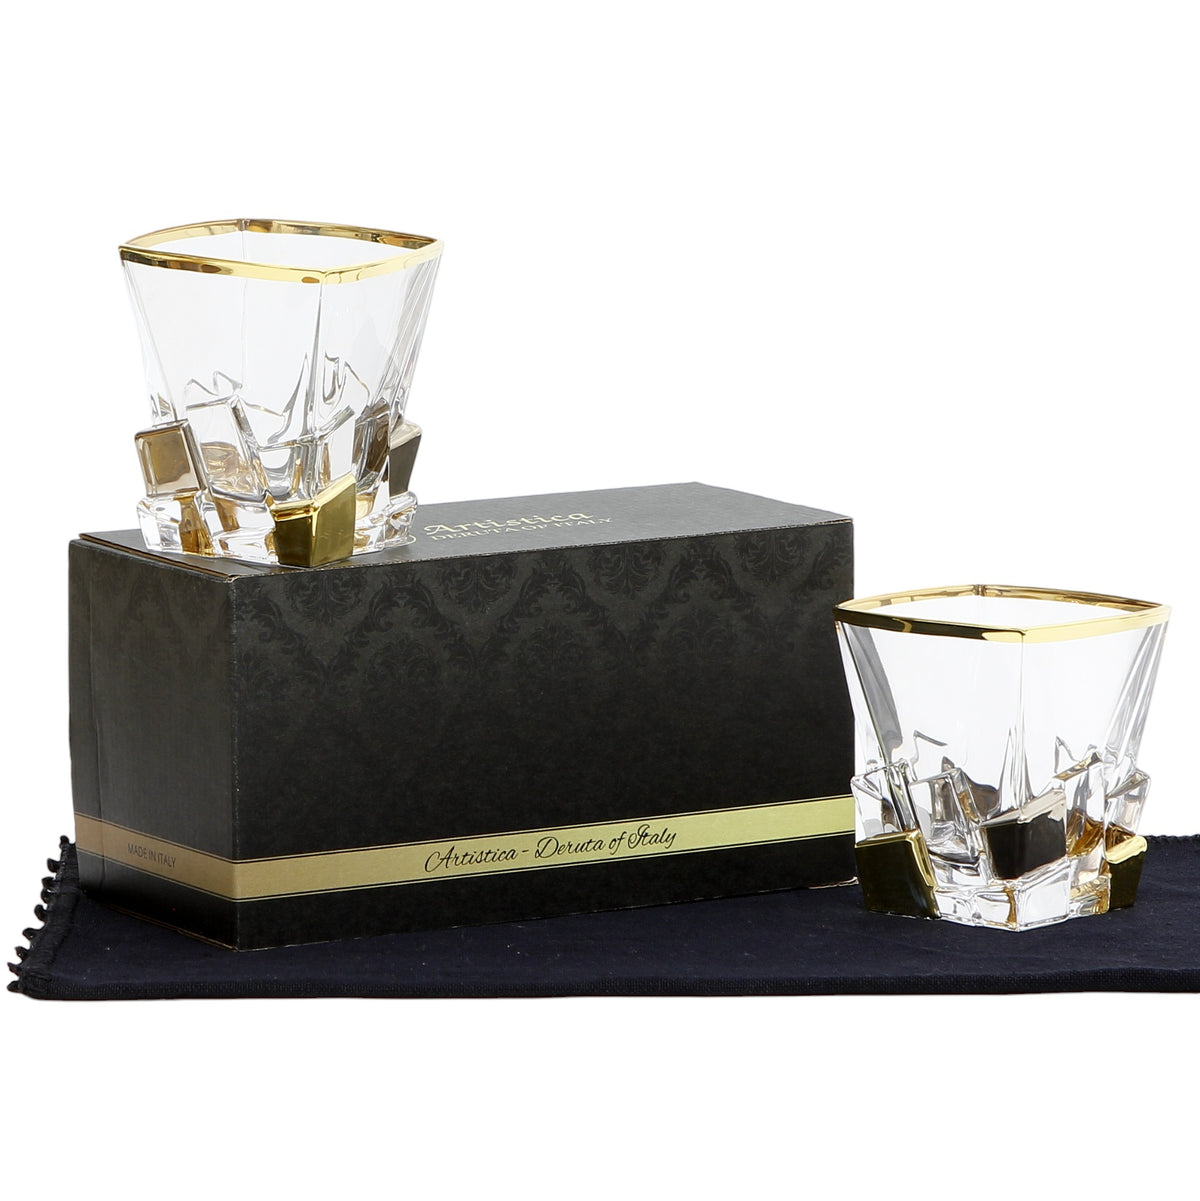 GIFT BOX With two EXQUISITE ITALIAN CRYSTAL SQUARE GLASS FOR WHISKEY/OLD FASHION FEATURING A 24 CARAT GOLD RIM AND GOLD/PLATINUM ACCENTS.